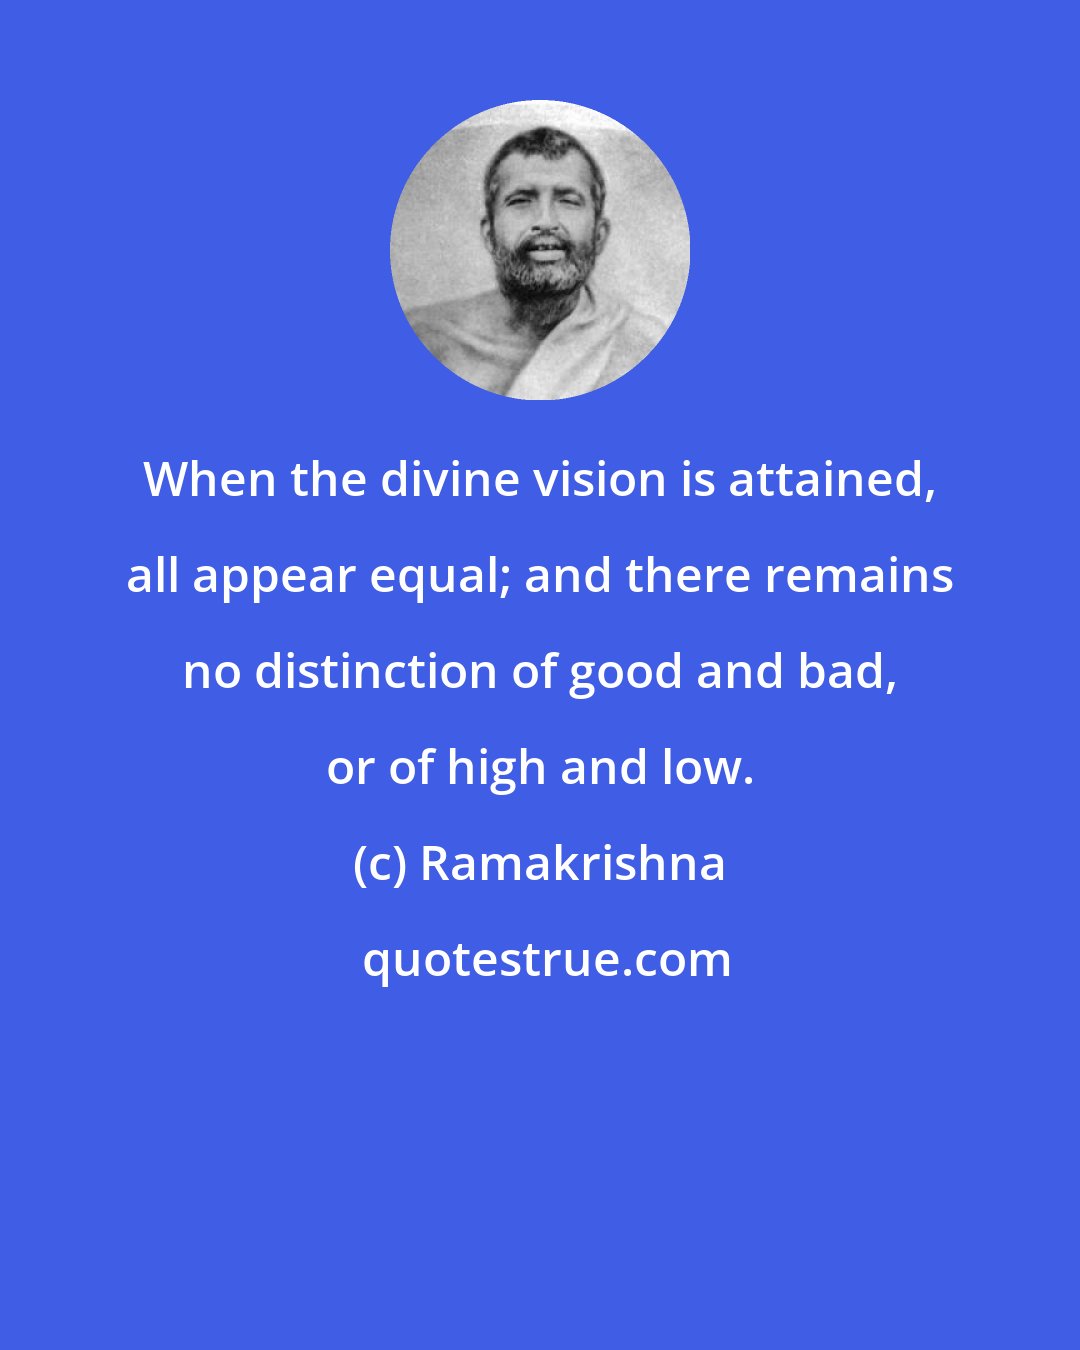 Ramakrishna: When the divine vision is attained, all appear equal; and there remains no distinction of good and bad, or of high and low.